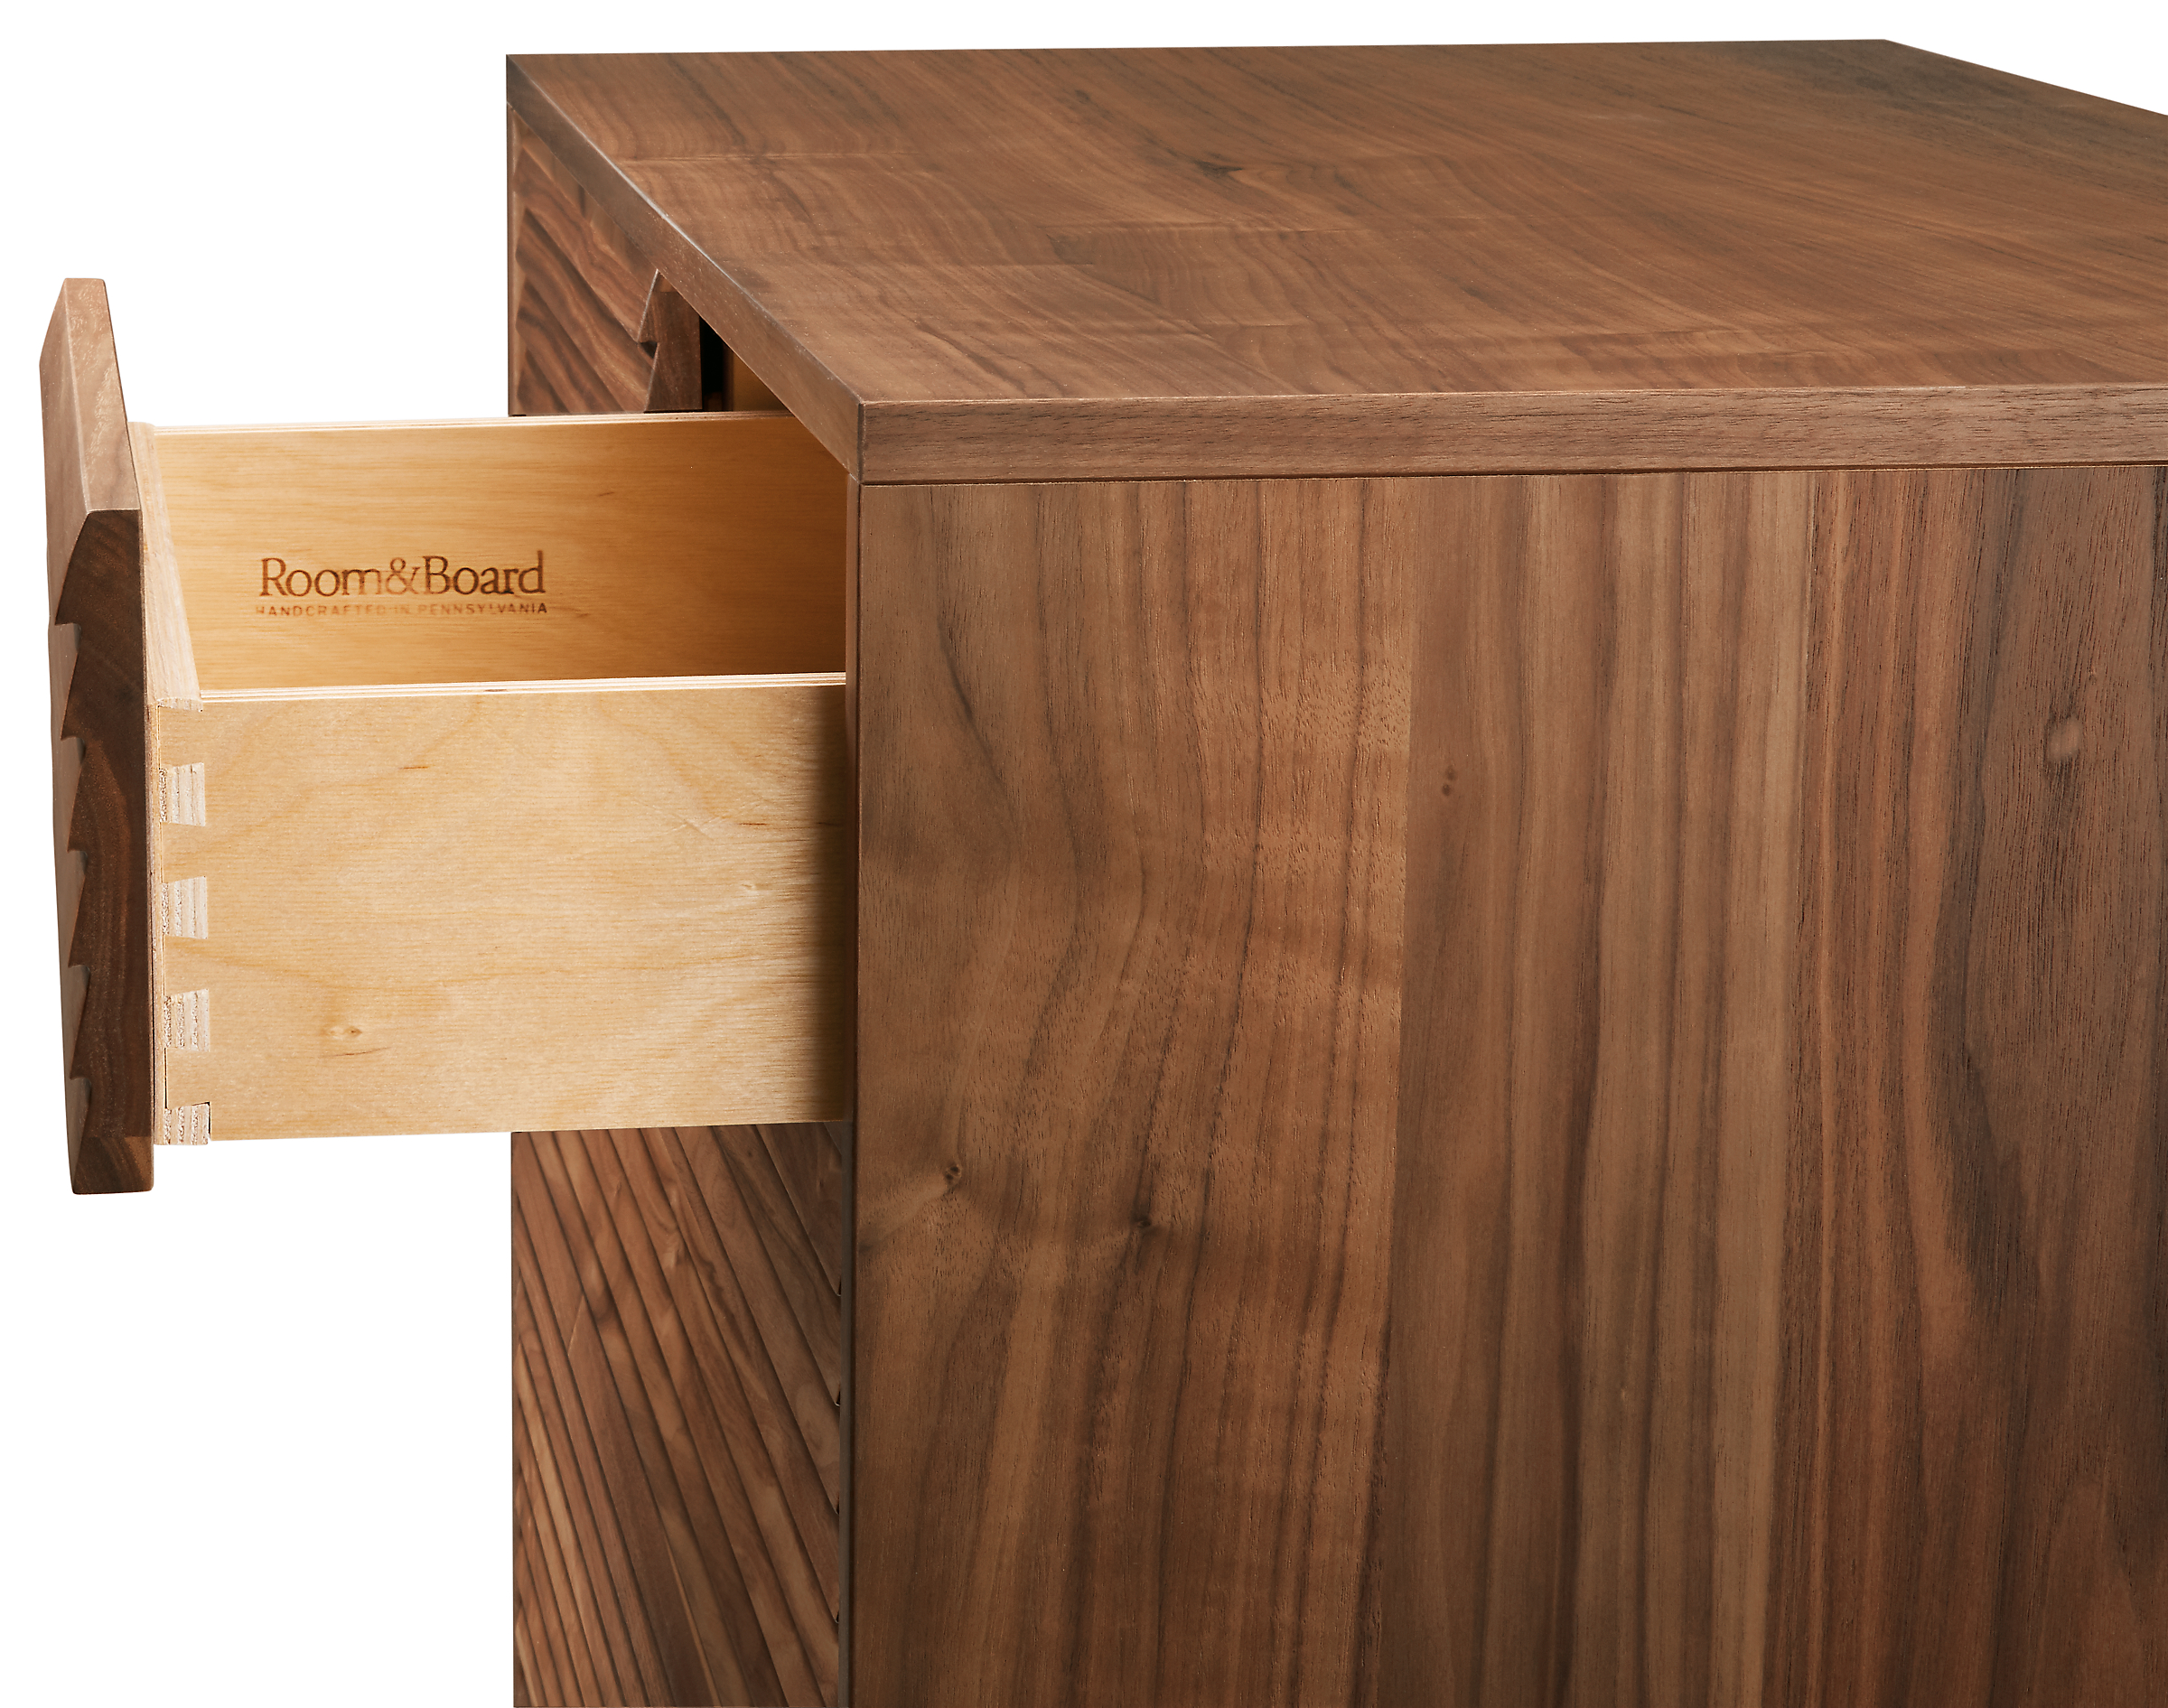 Side detail of open Adrian drawer.